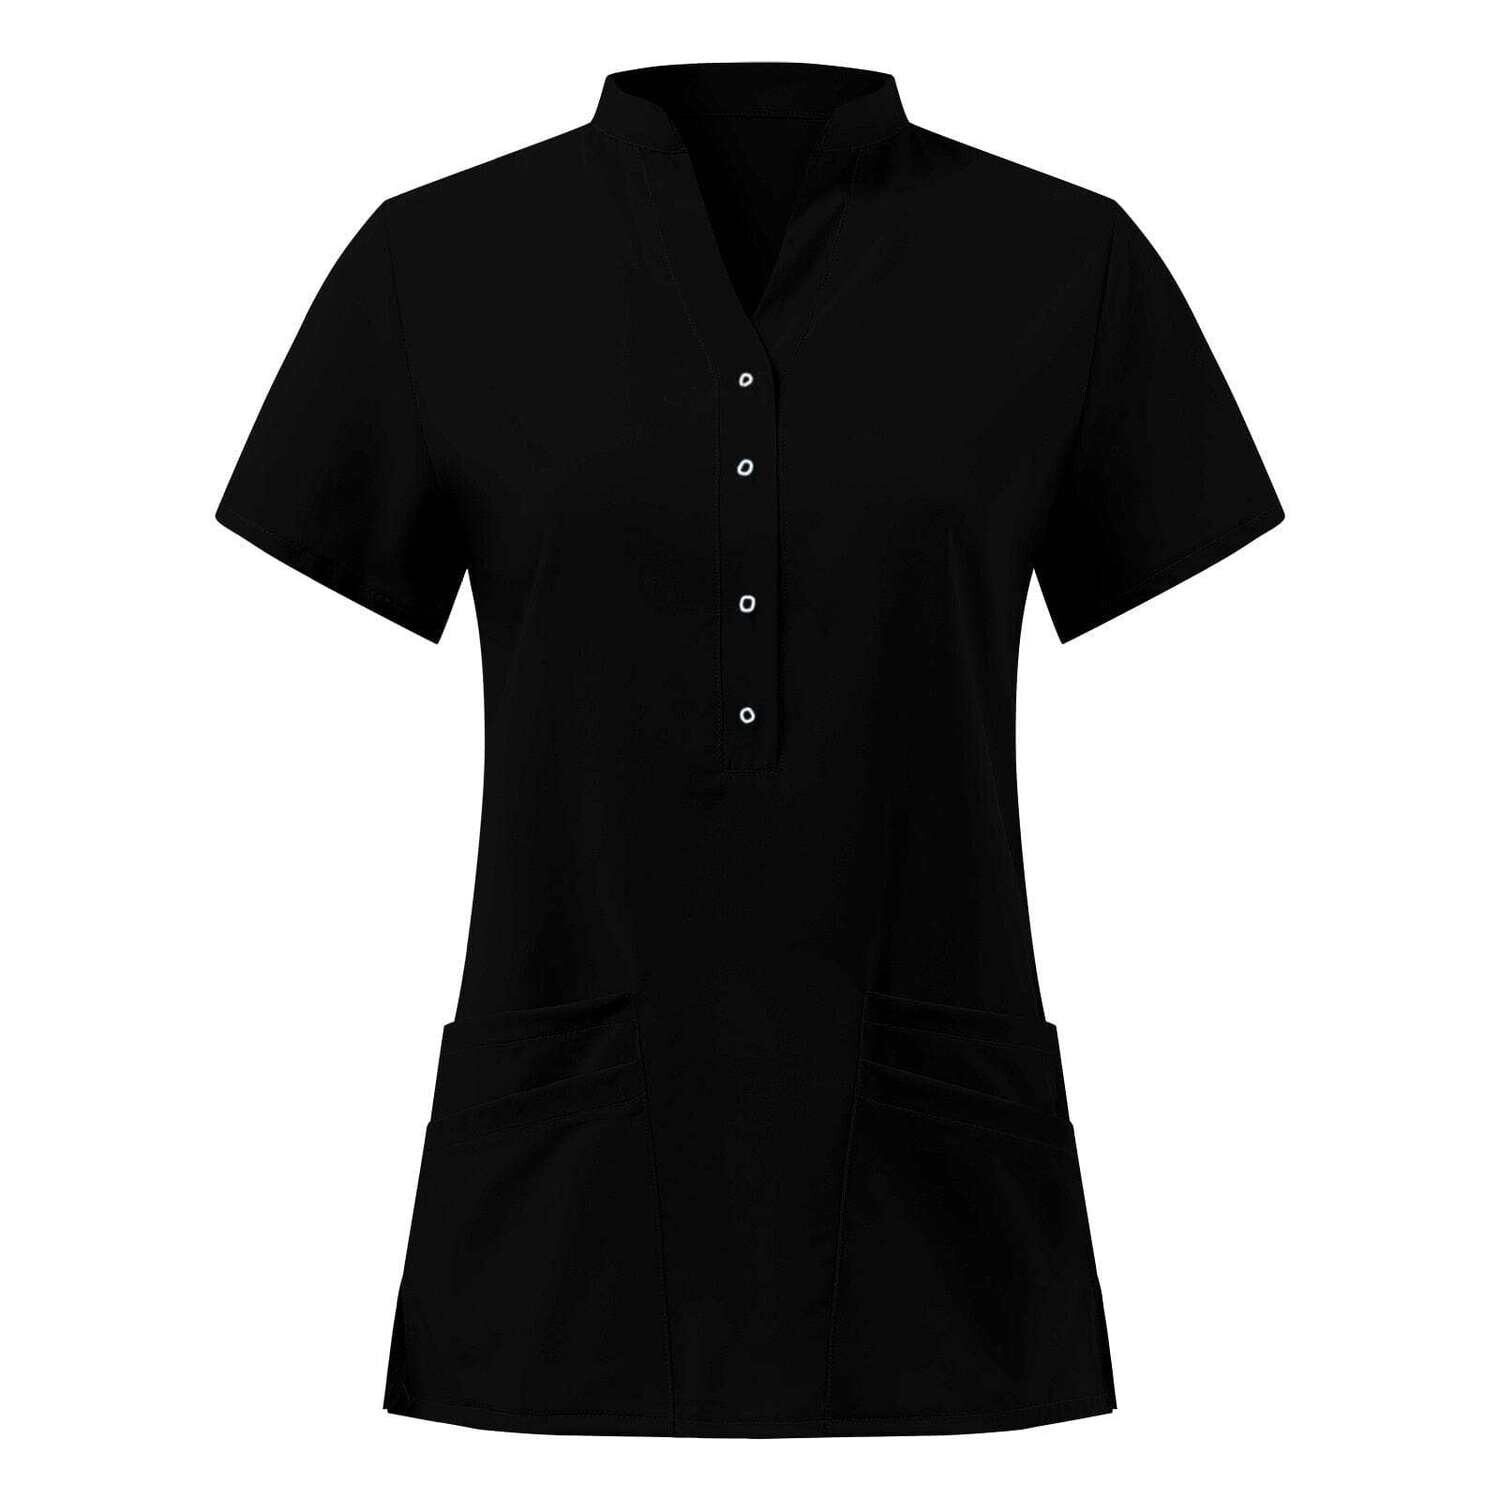 Solid Summer Beauty Uniforms for Workwear Spas Waitresstops A50 Beautician Scrub Tops